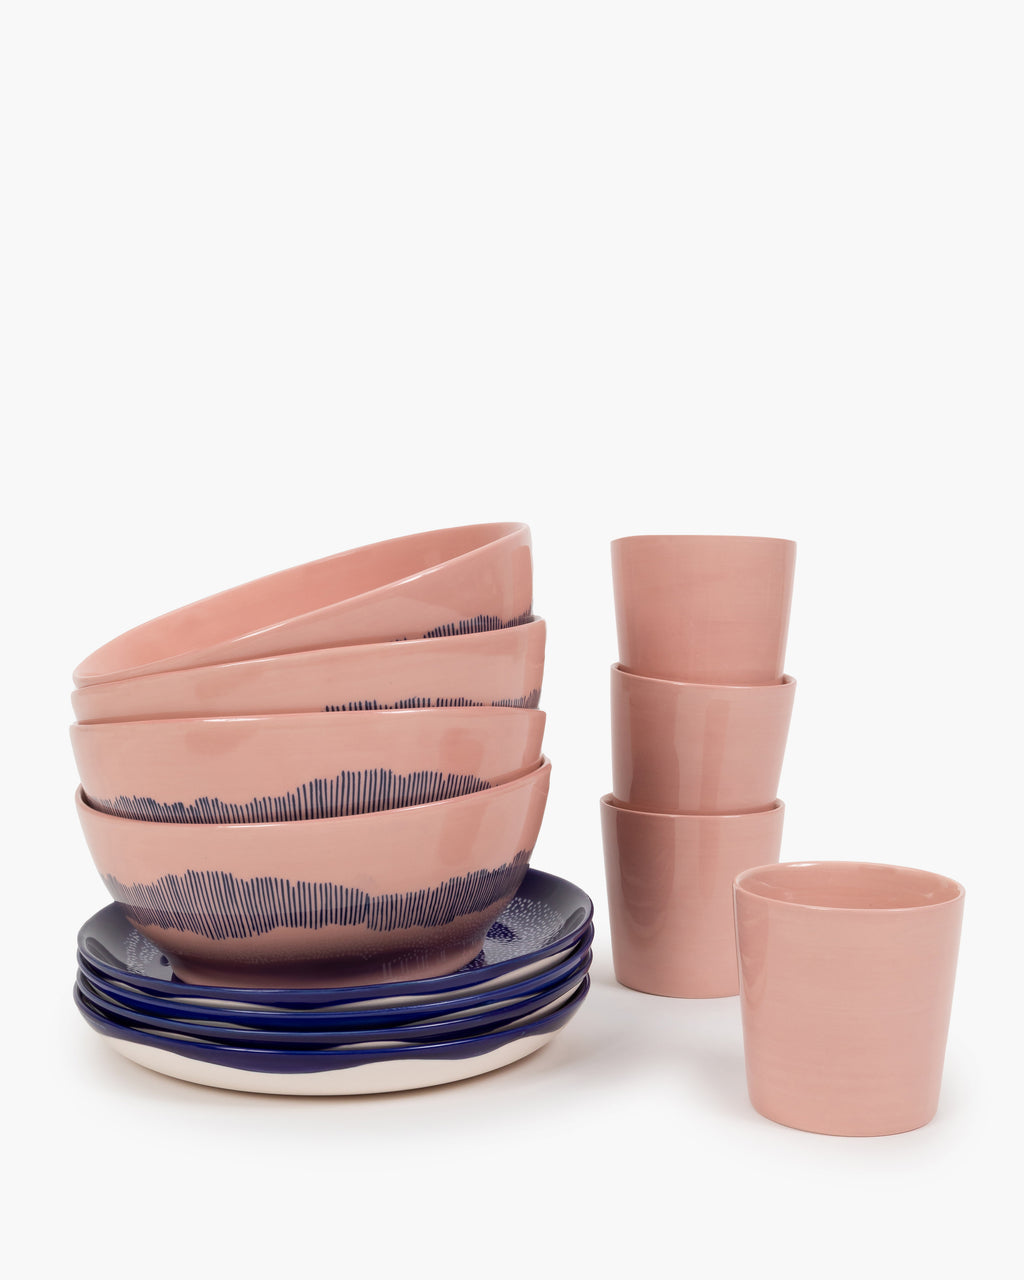 Breakfast Set 12 pieces - Feast tableware by Ottolenghi - Pink